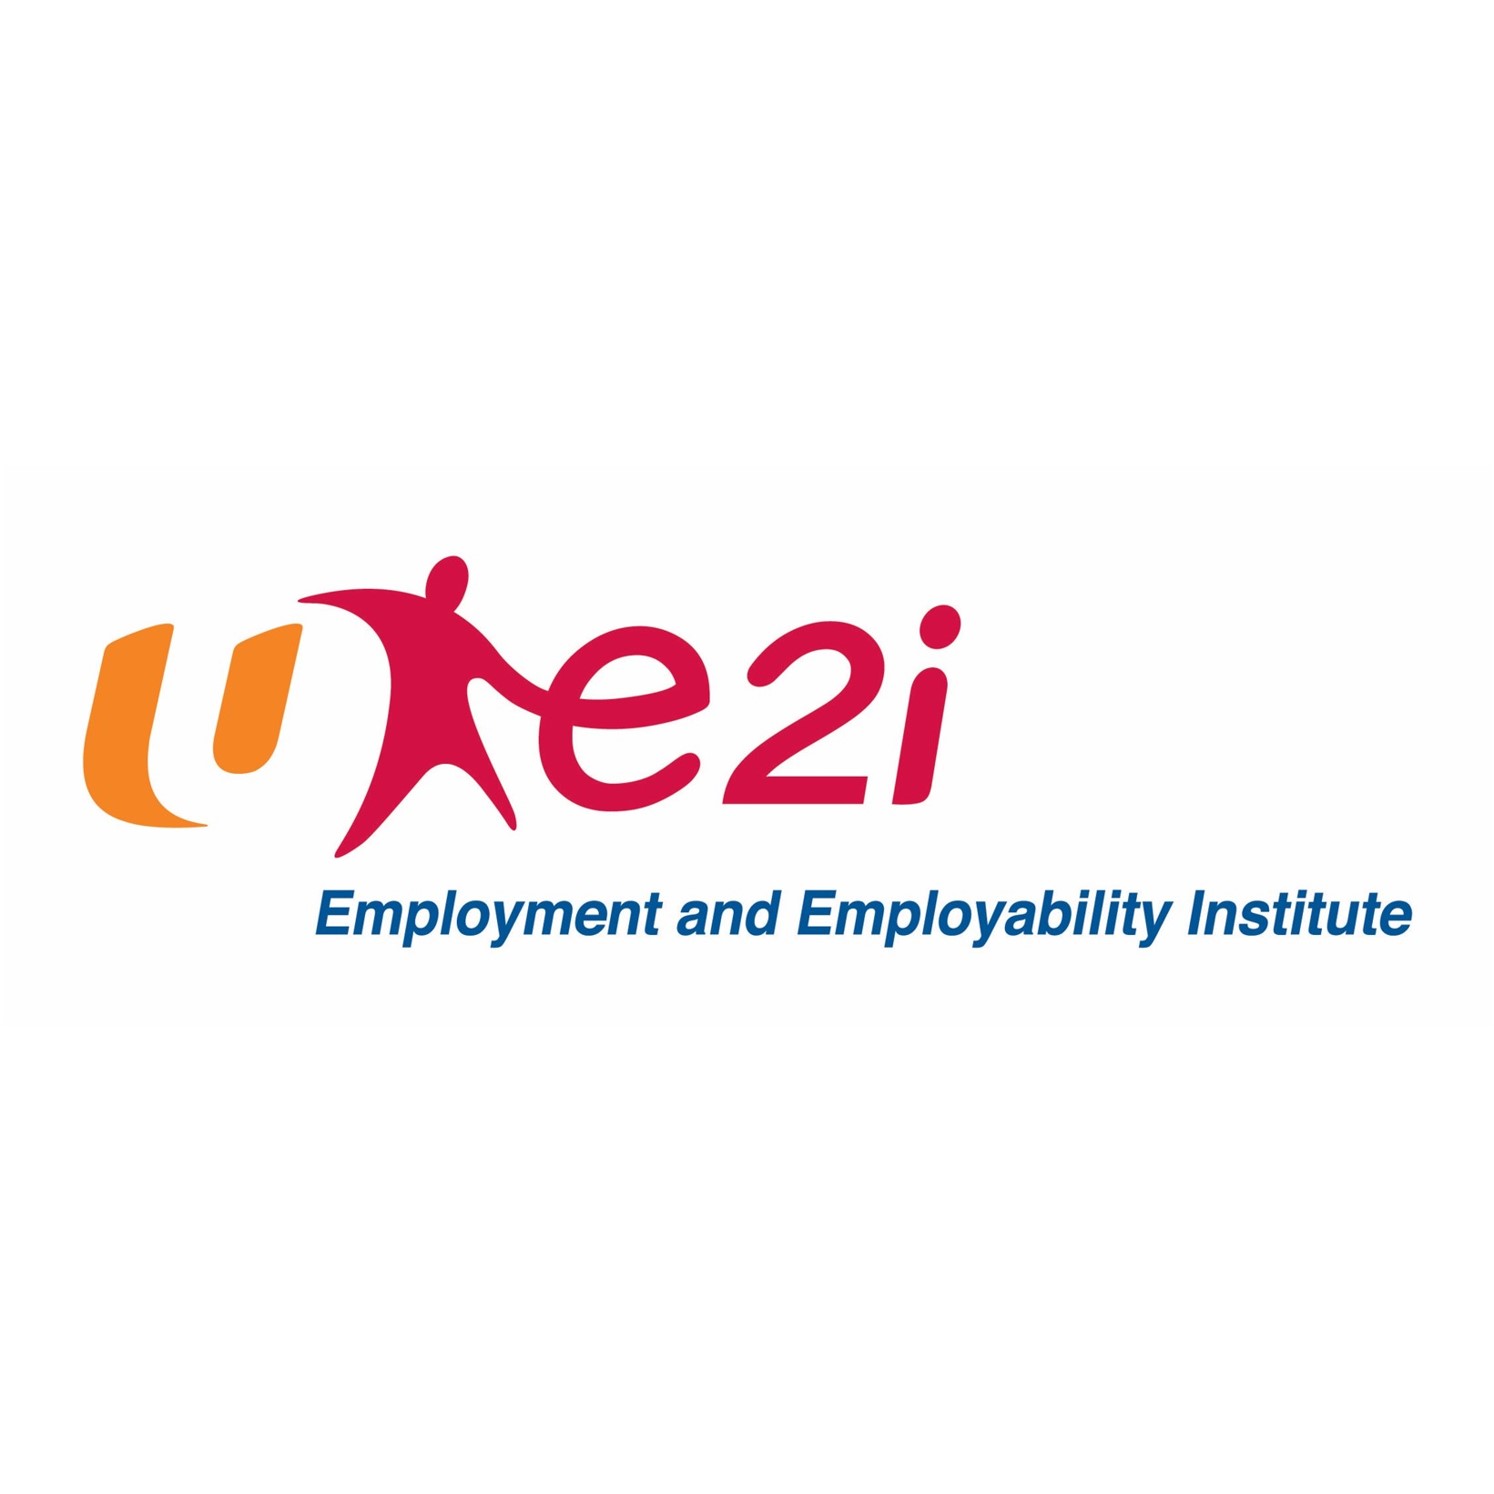 Employment And Employability Institute Pte. Ltd. company logo